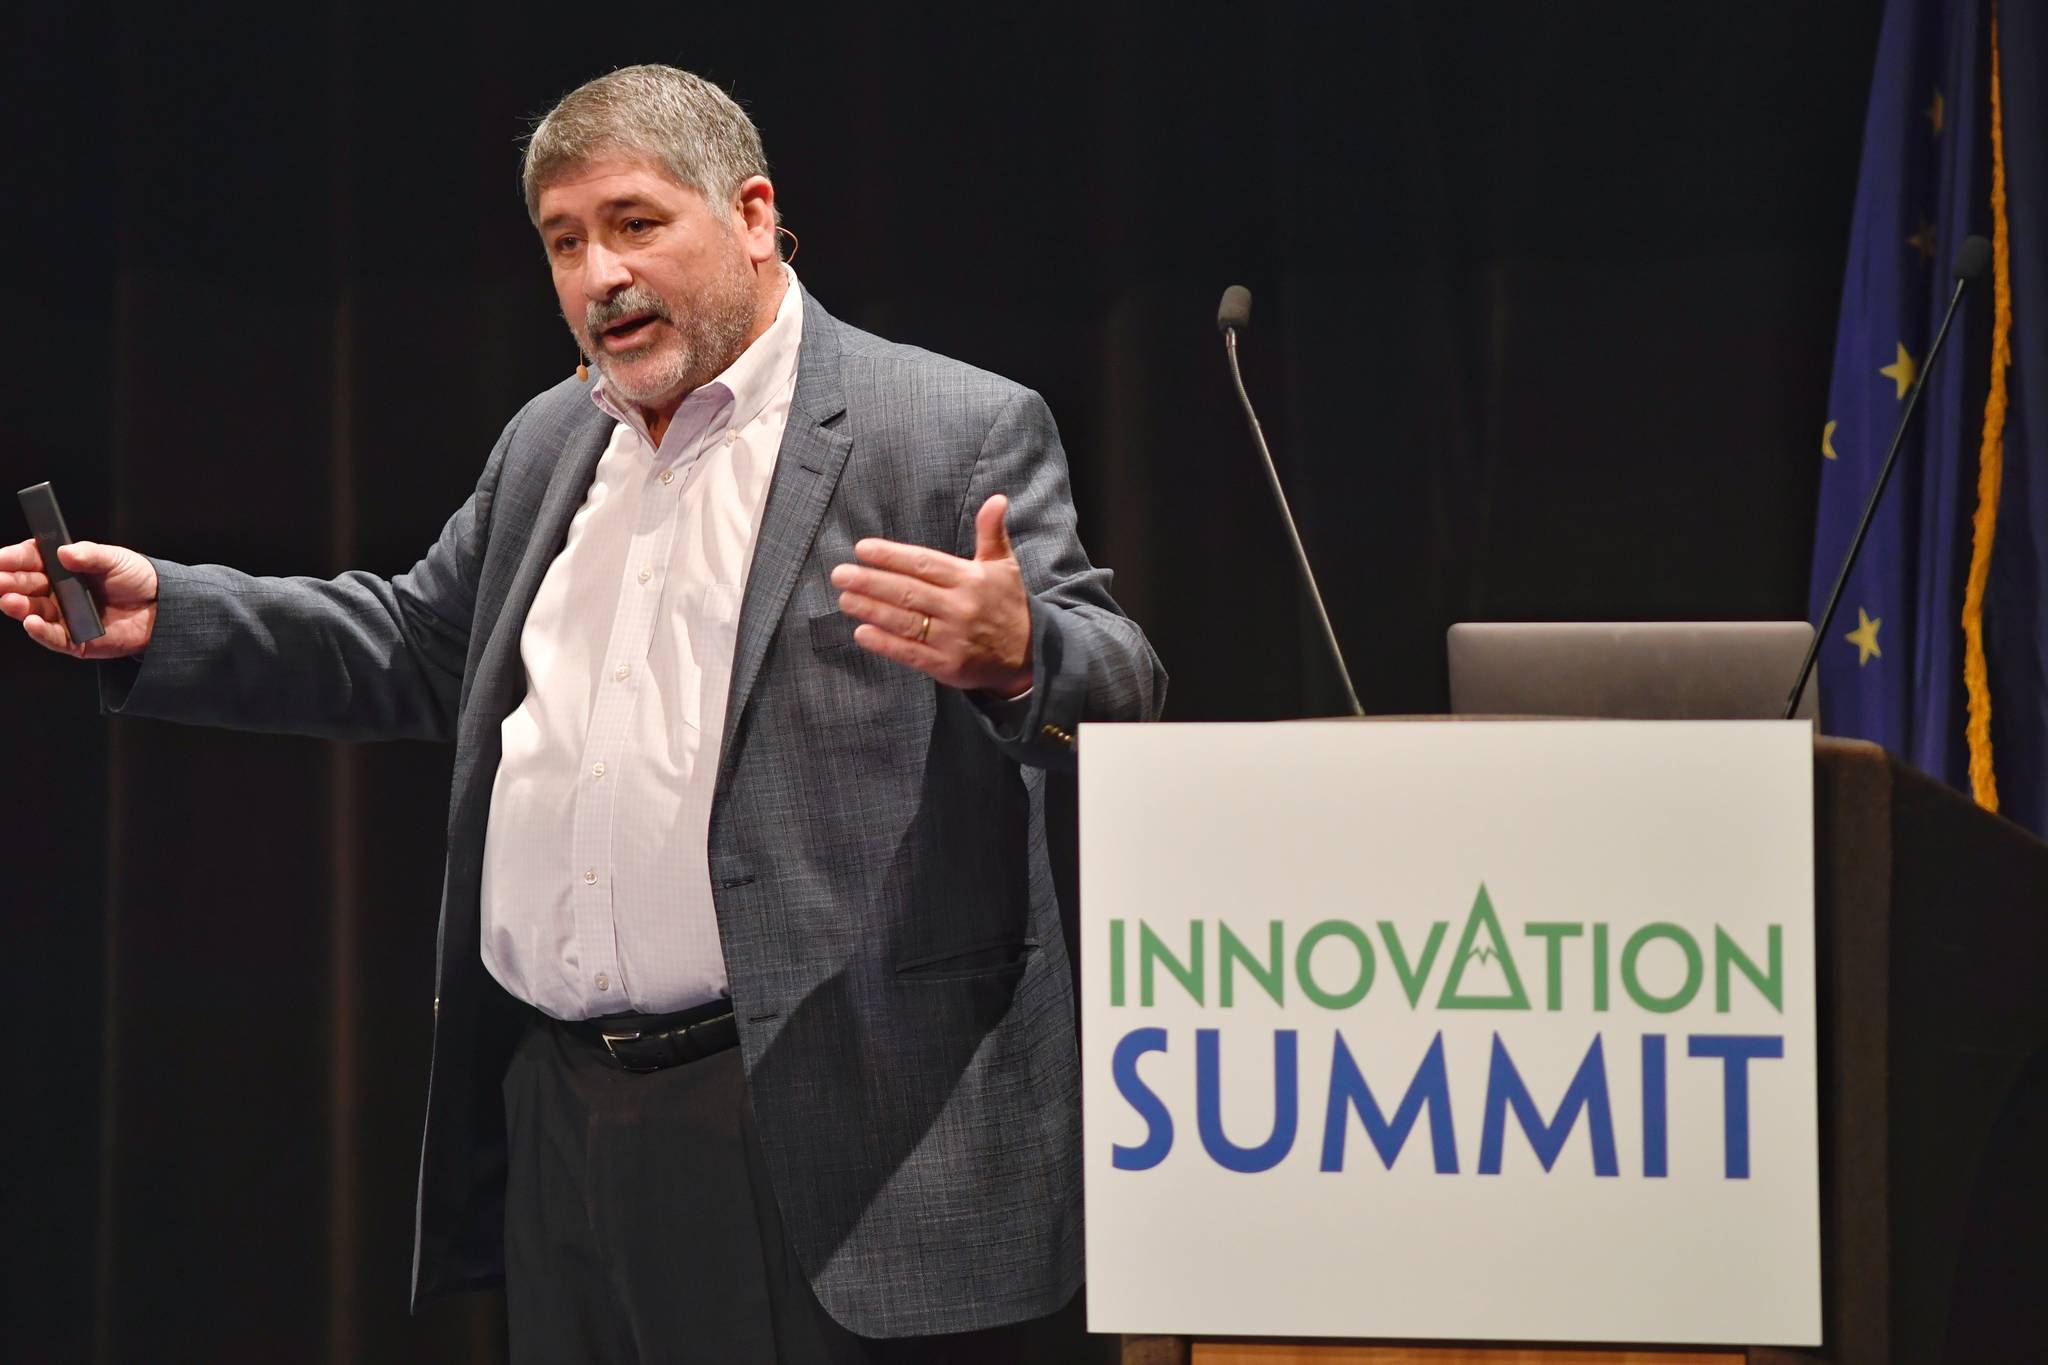 Joel Cutcher-Gershenfield, of the Heller School for Social Policy and Management at Brandeis University, delivers his keynote speech at the Innovation Summit at Centennial Hall on Wednesday, Feb. 20, 2019. (Michael Penn | Juneau Empire)